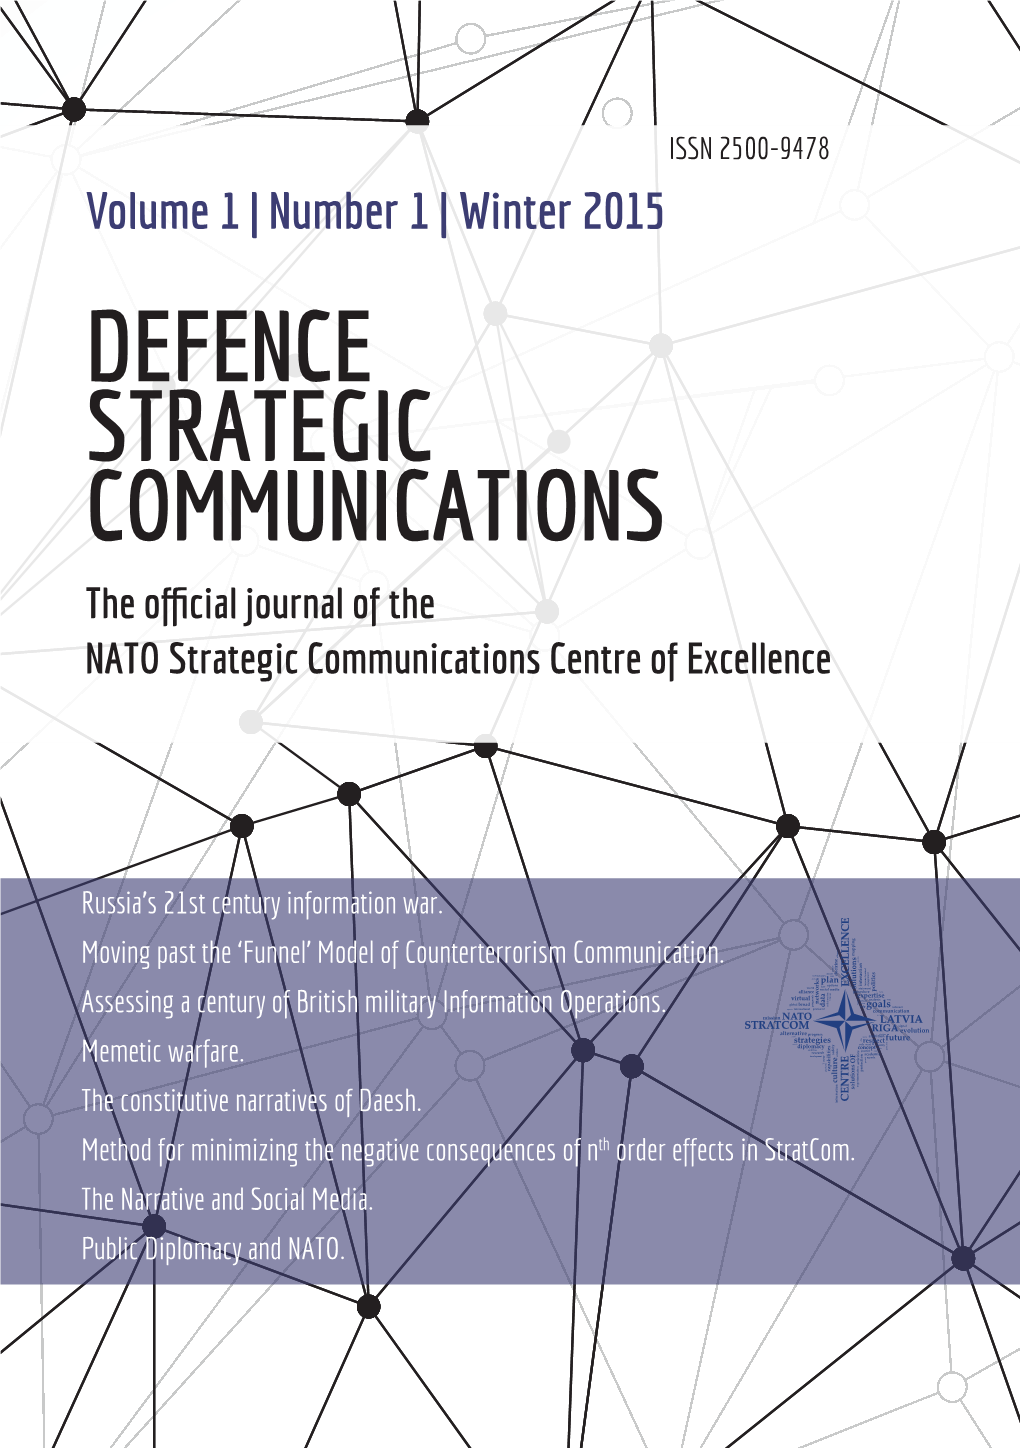 DEFENCE STRATEGIC COMMUNICATIONS the Official Journal of the NATO Strategic Communications Centre of Excellence